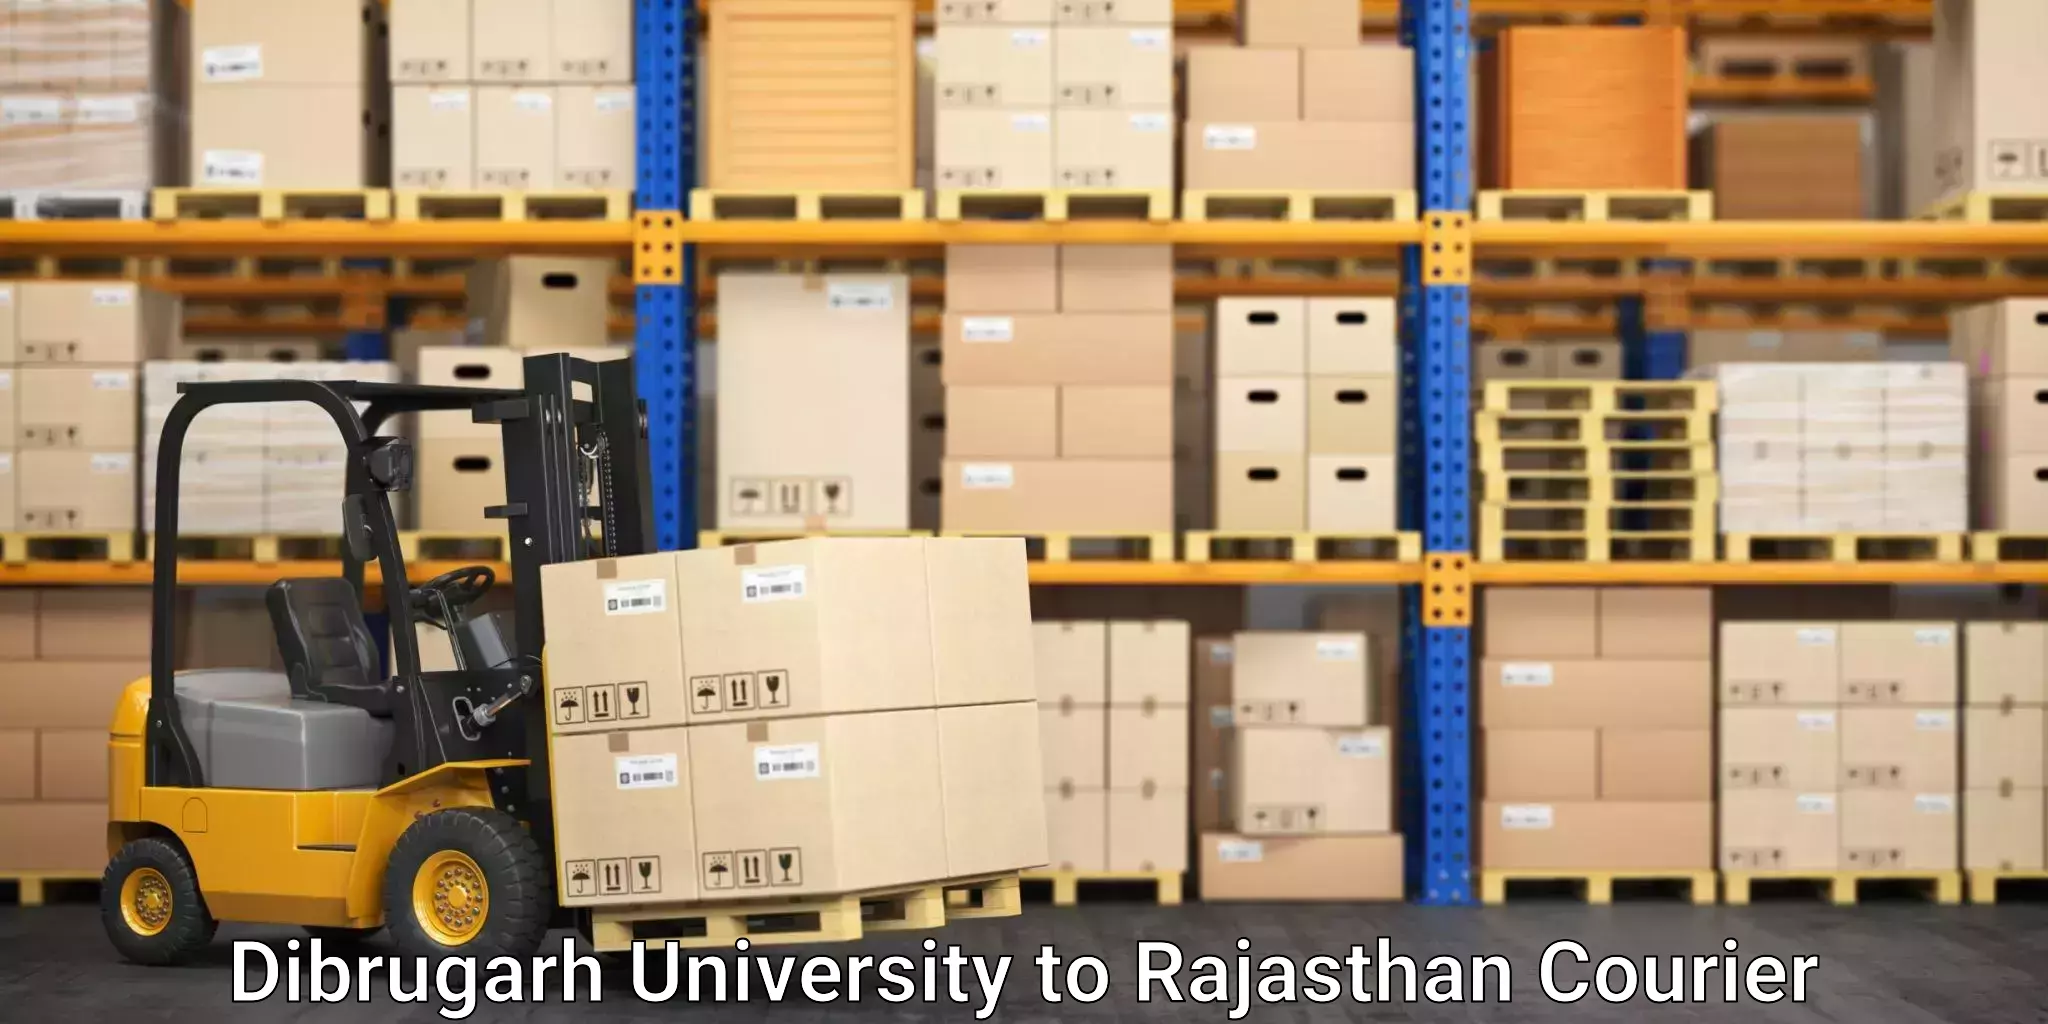 Holiday shipping services Dibrugarh University to IIIT Kota